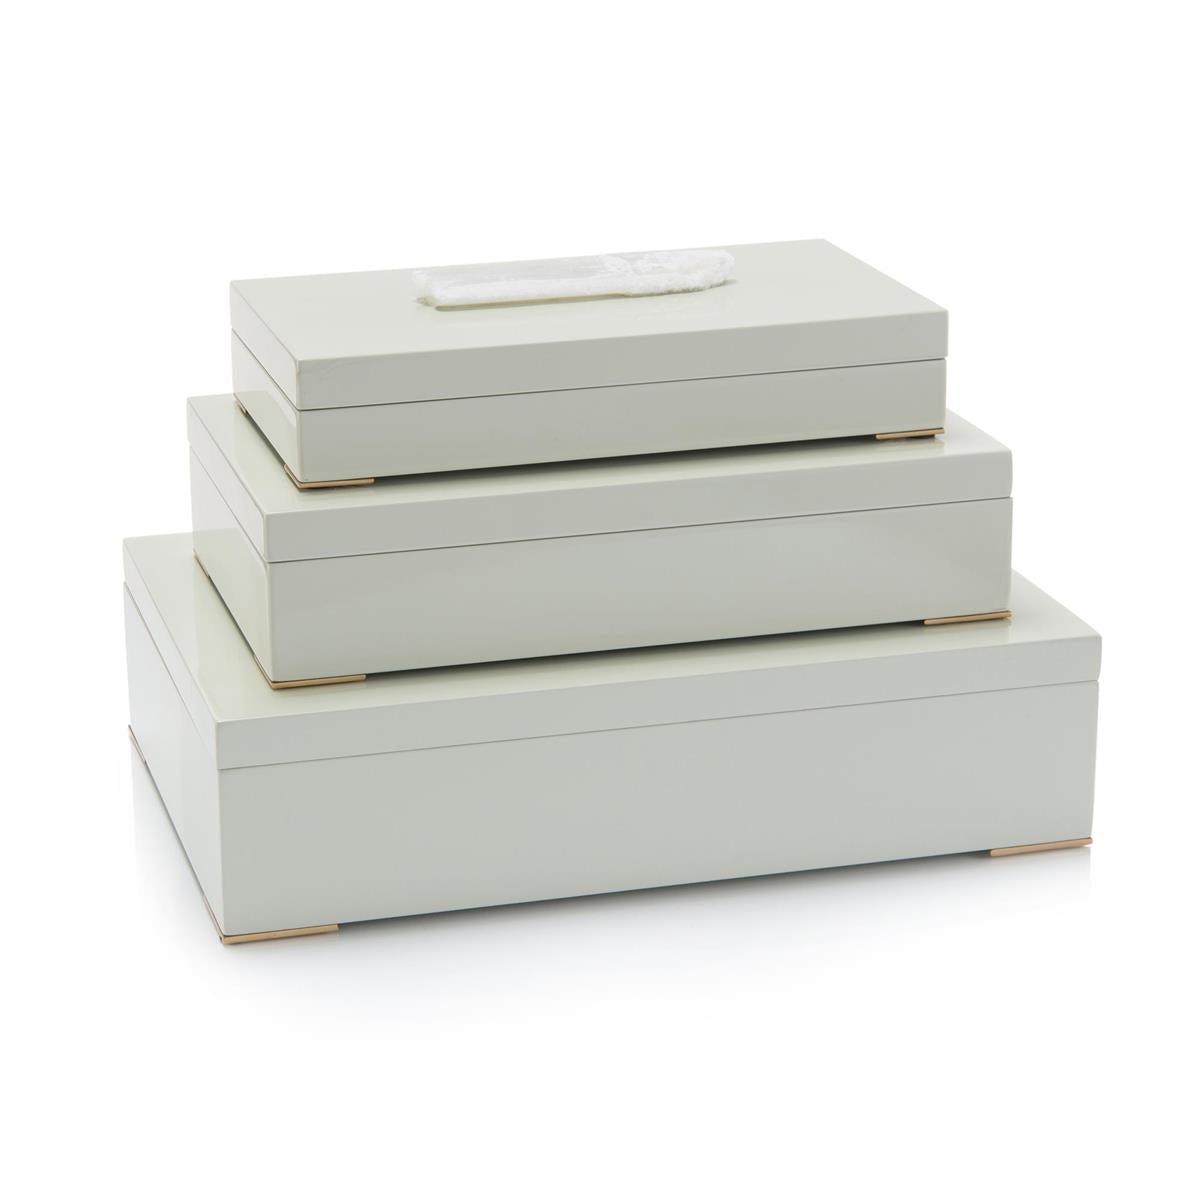 Set of Three Boxes Topped in Selenite-John Richard-Office Accessories-Artistic Elements